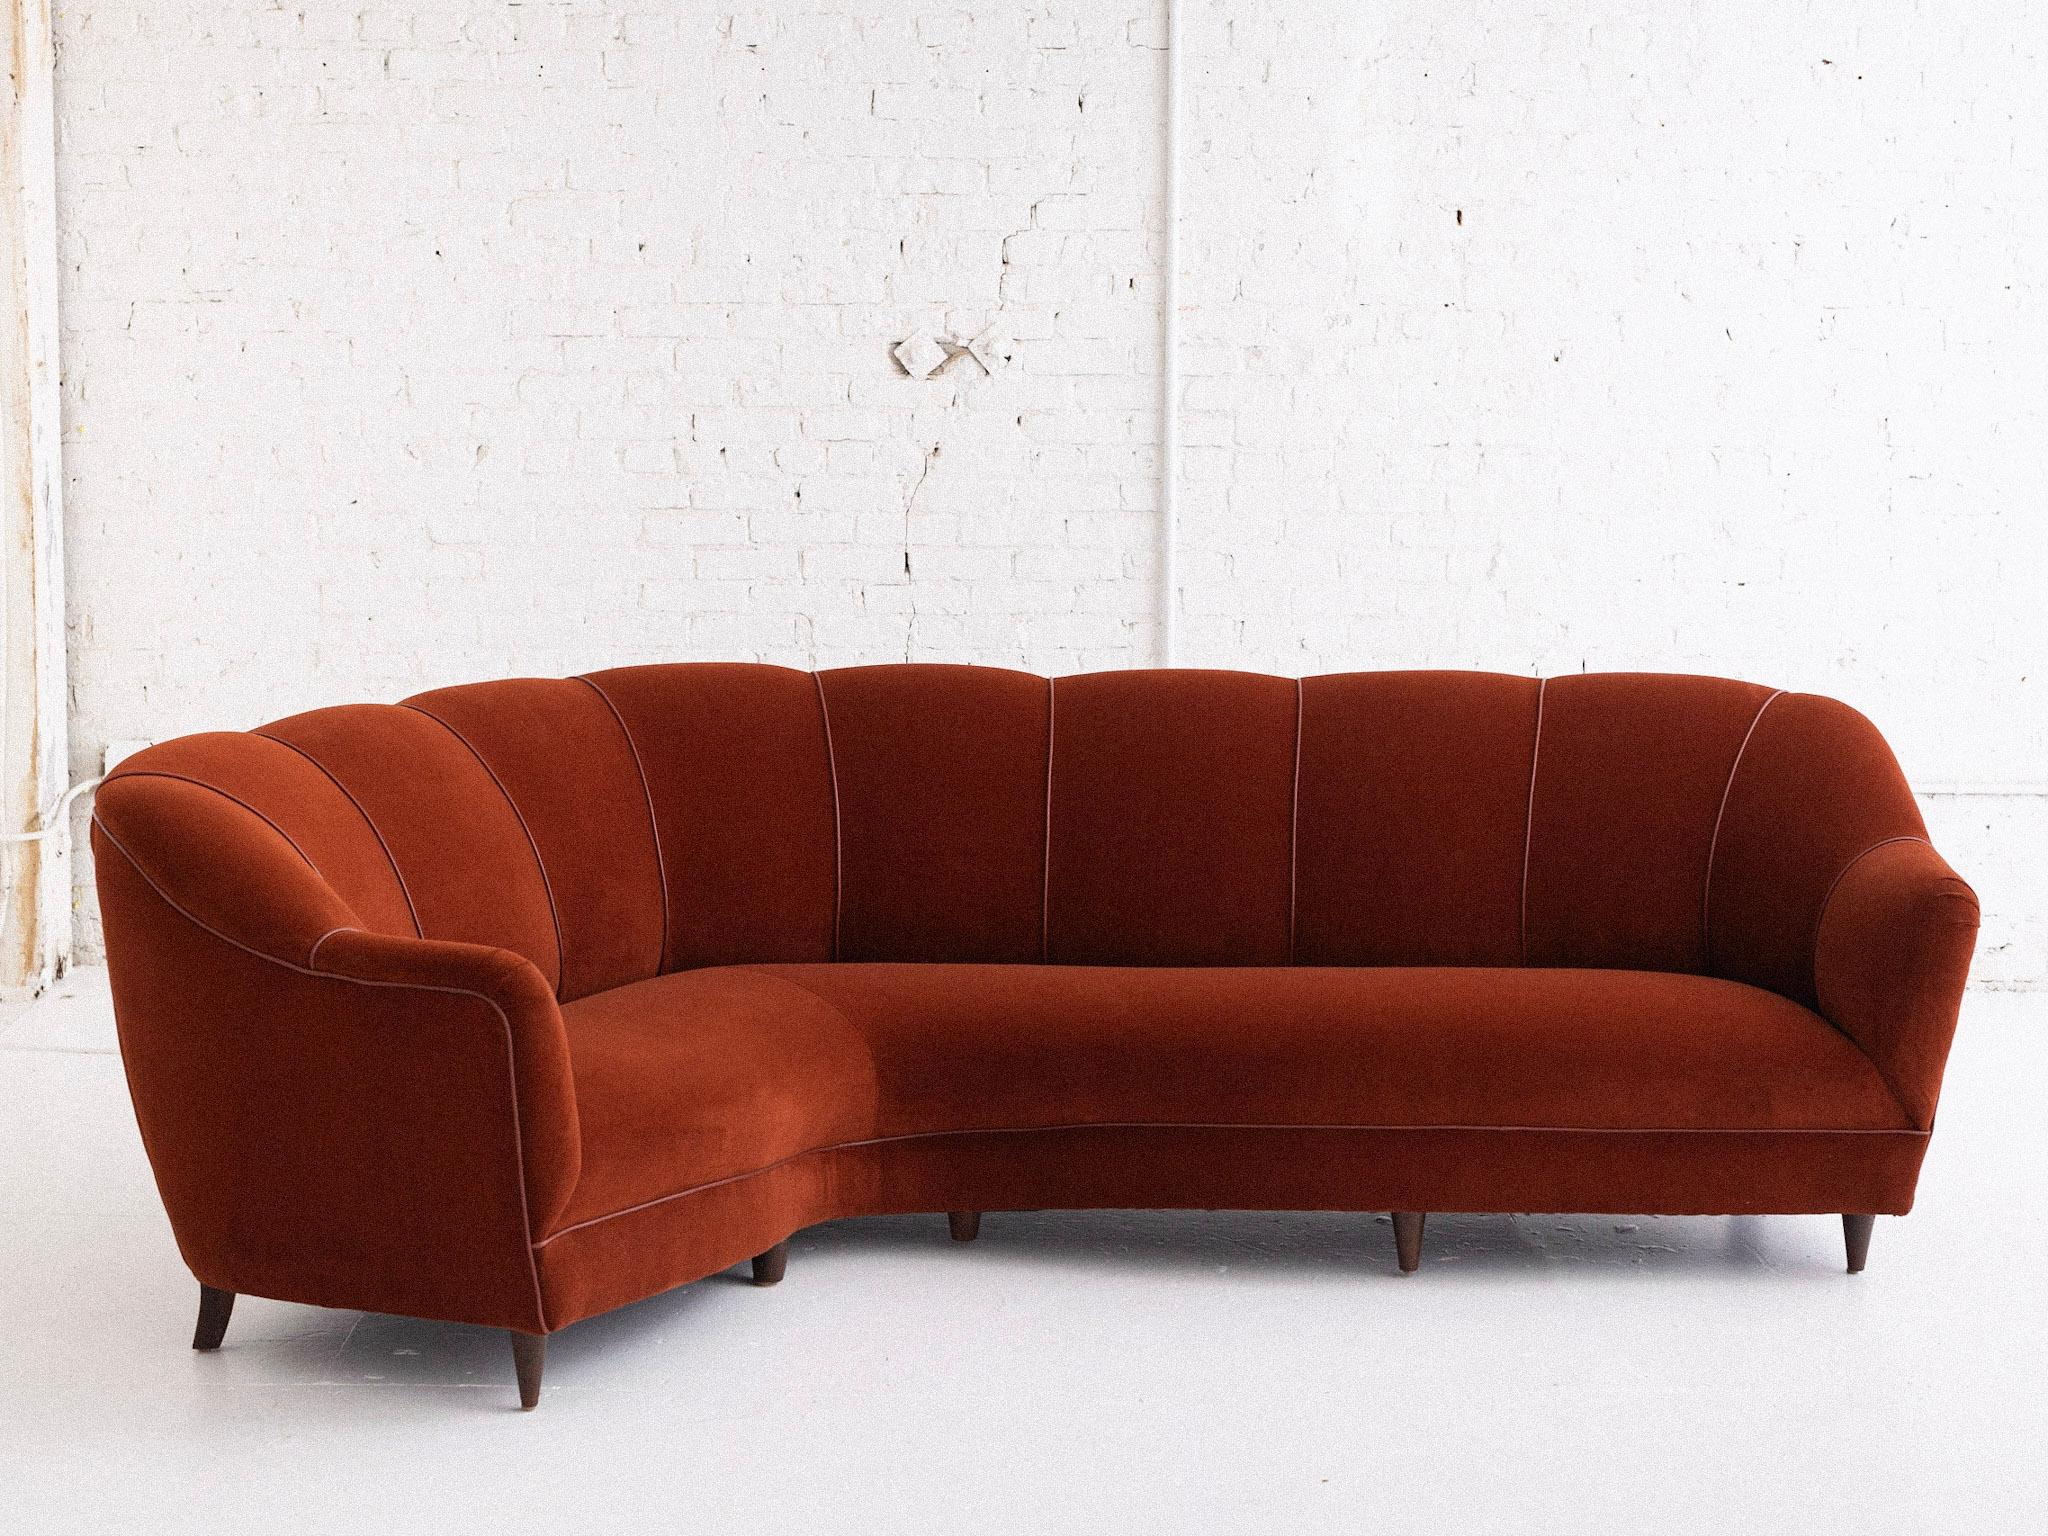 A midcentury Italian channel back sofa. Newly upholstered in a rust cotton velvet with leather trim. Curved corner shape. Sourced outside of Florence, Italy.